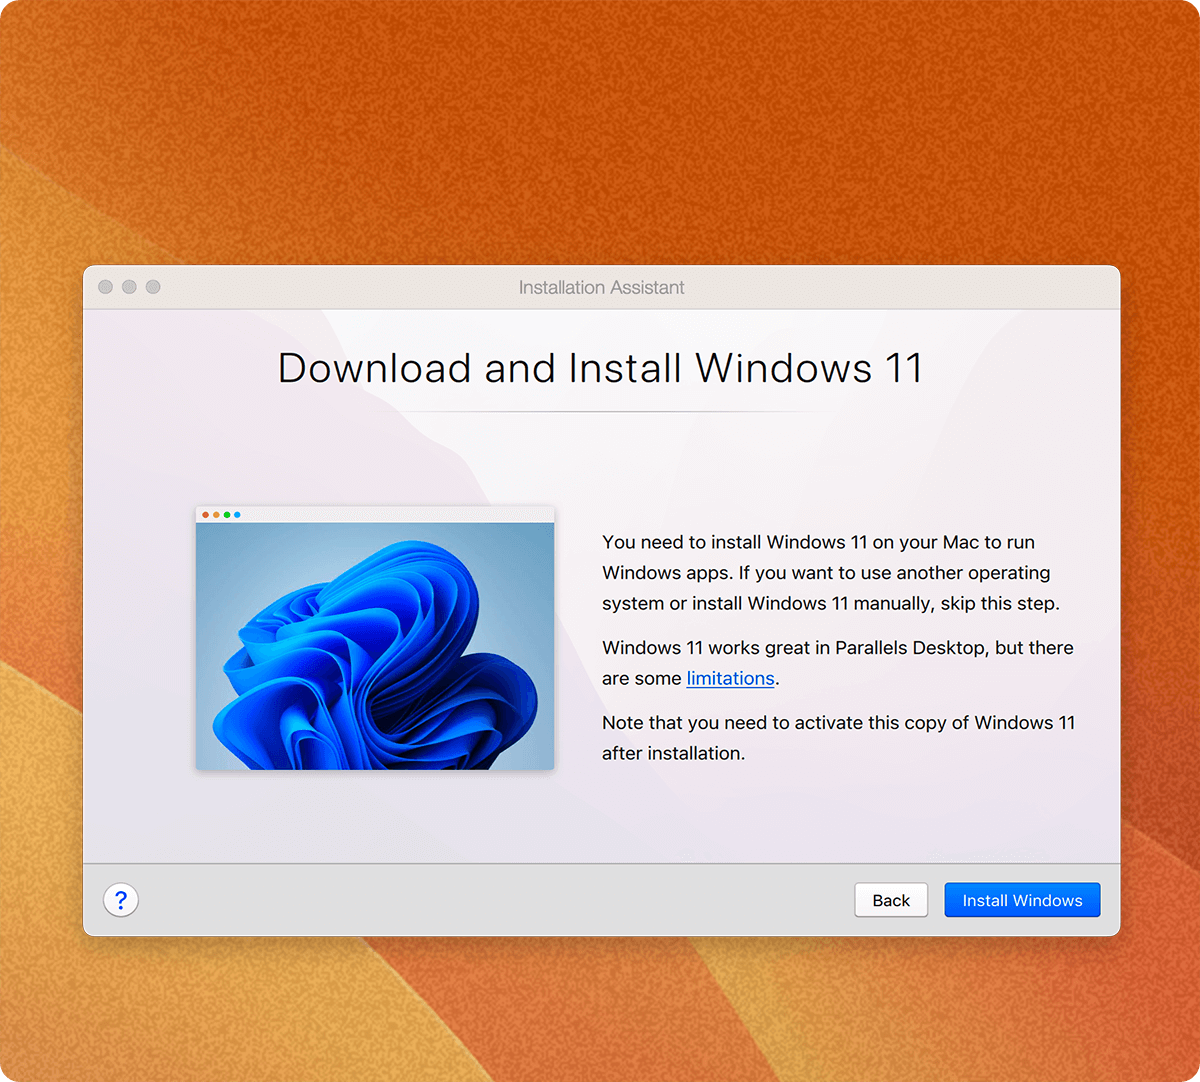 Download, Install, and configure Windows 11 on your Mac in two clicks